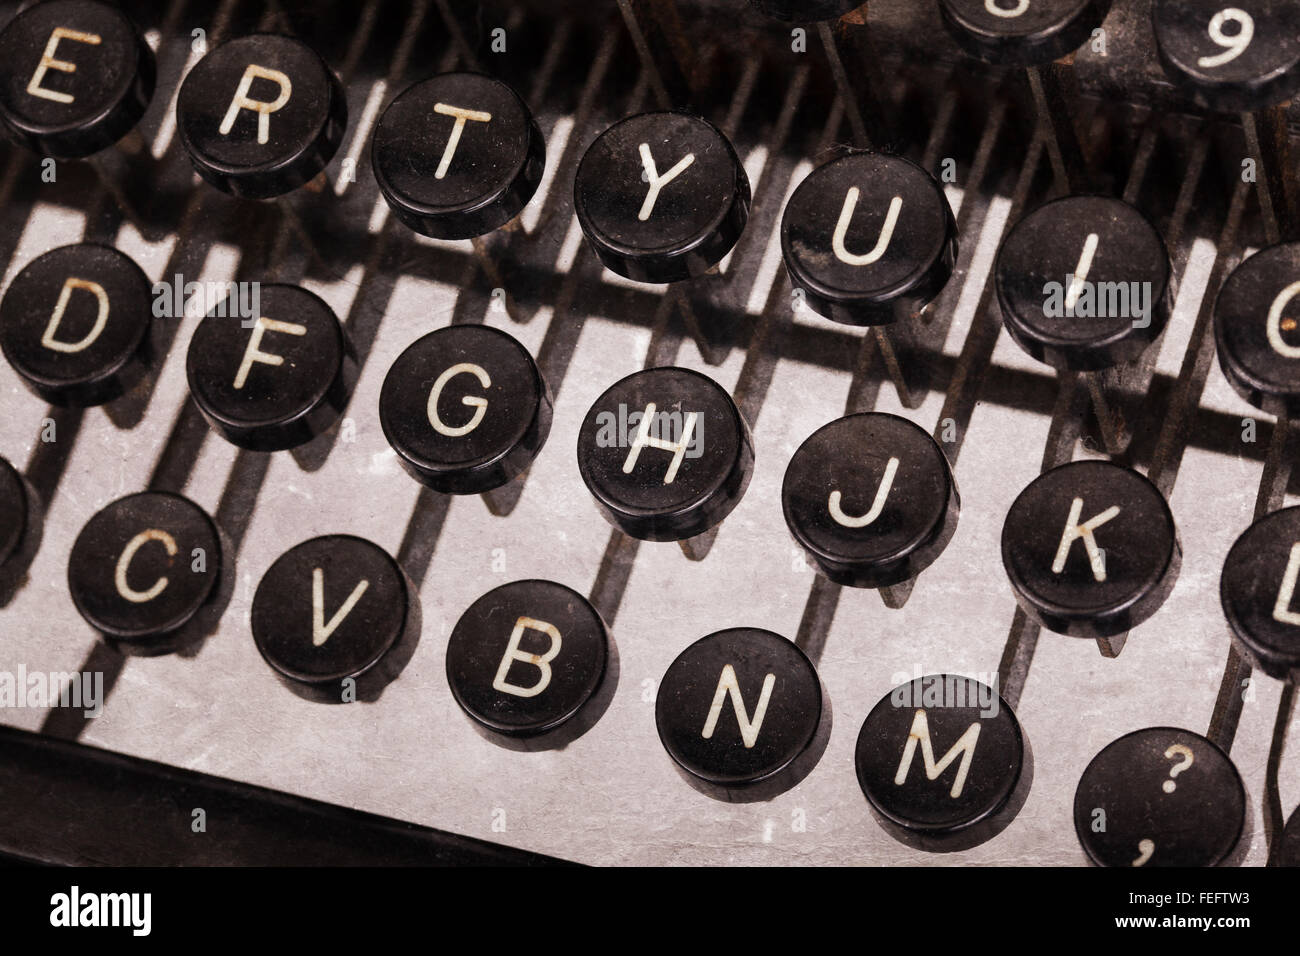 Old typewriter keyboard - Vintage image, noise and scratches Stock Photo